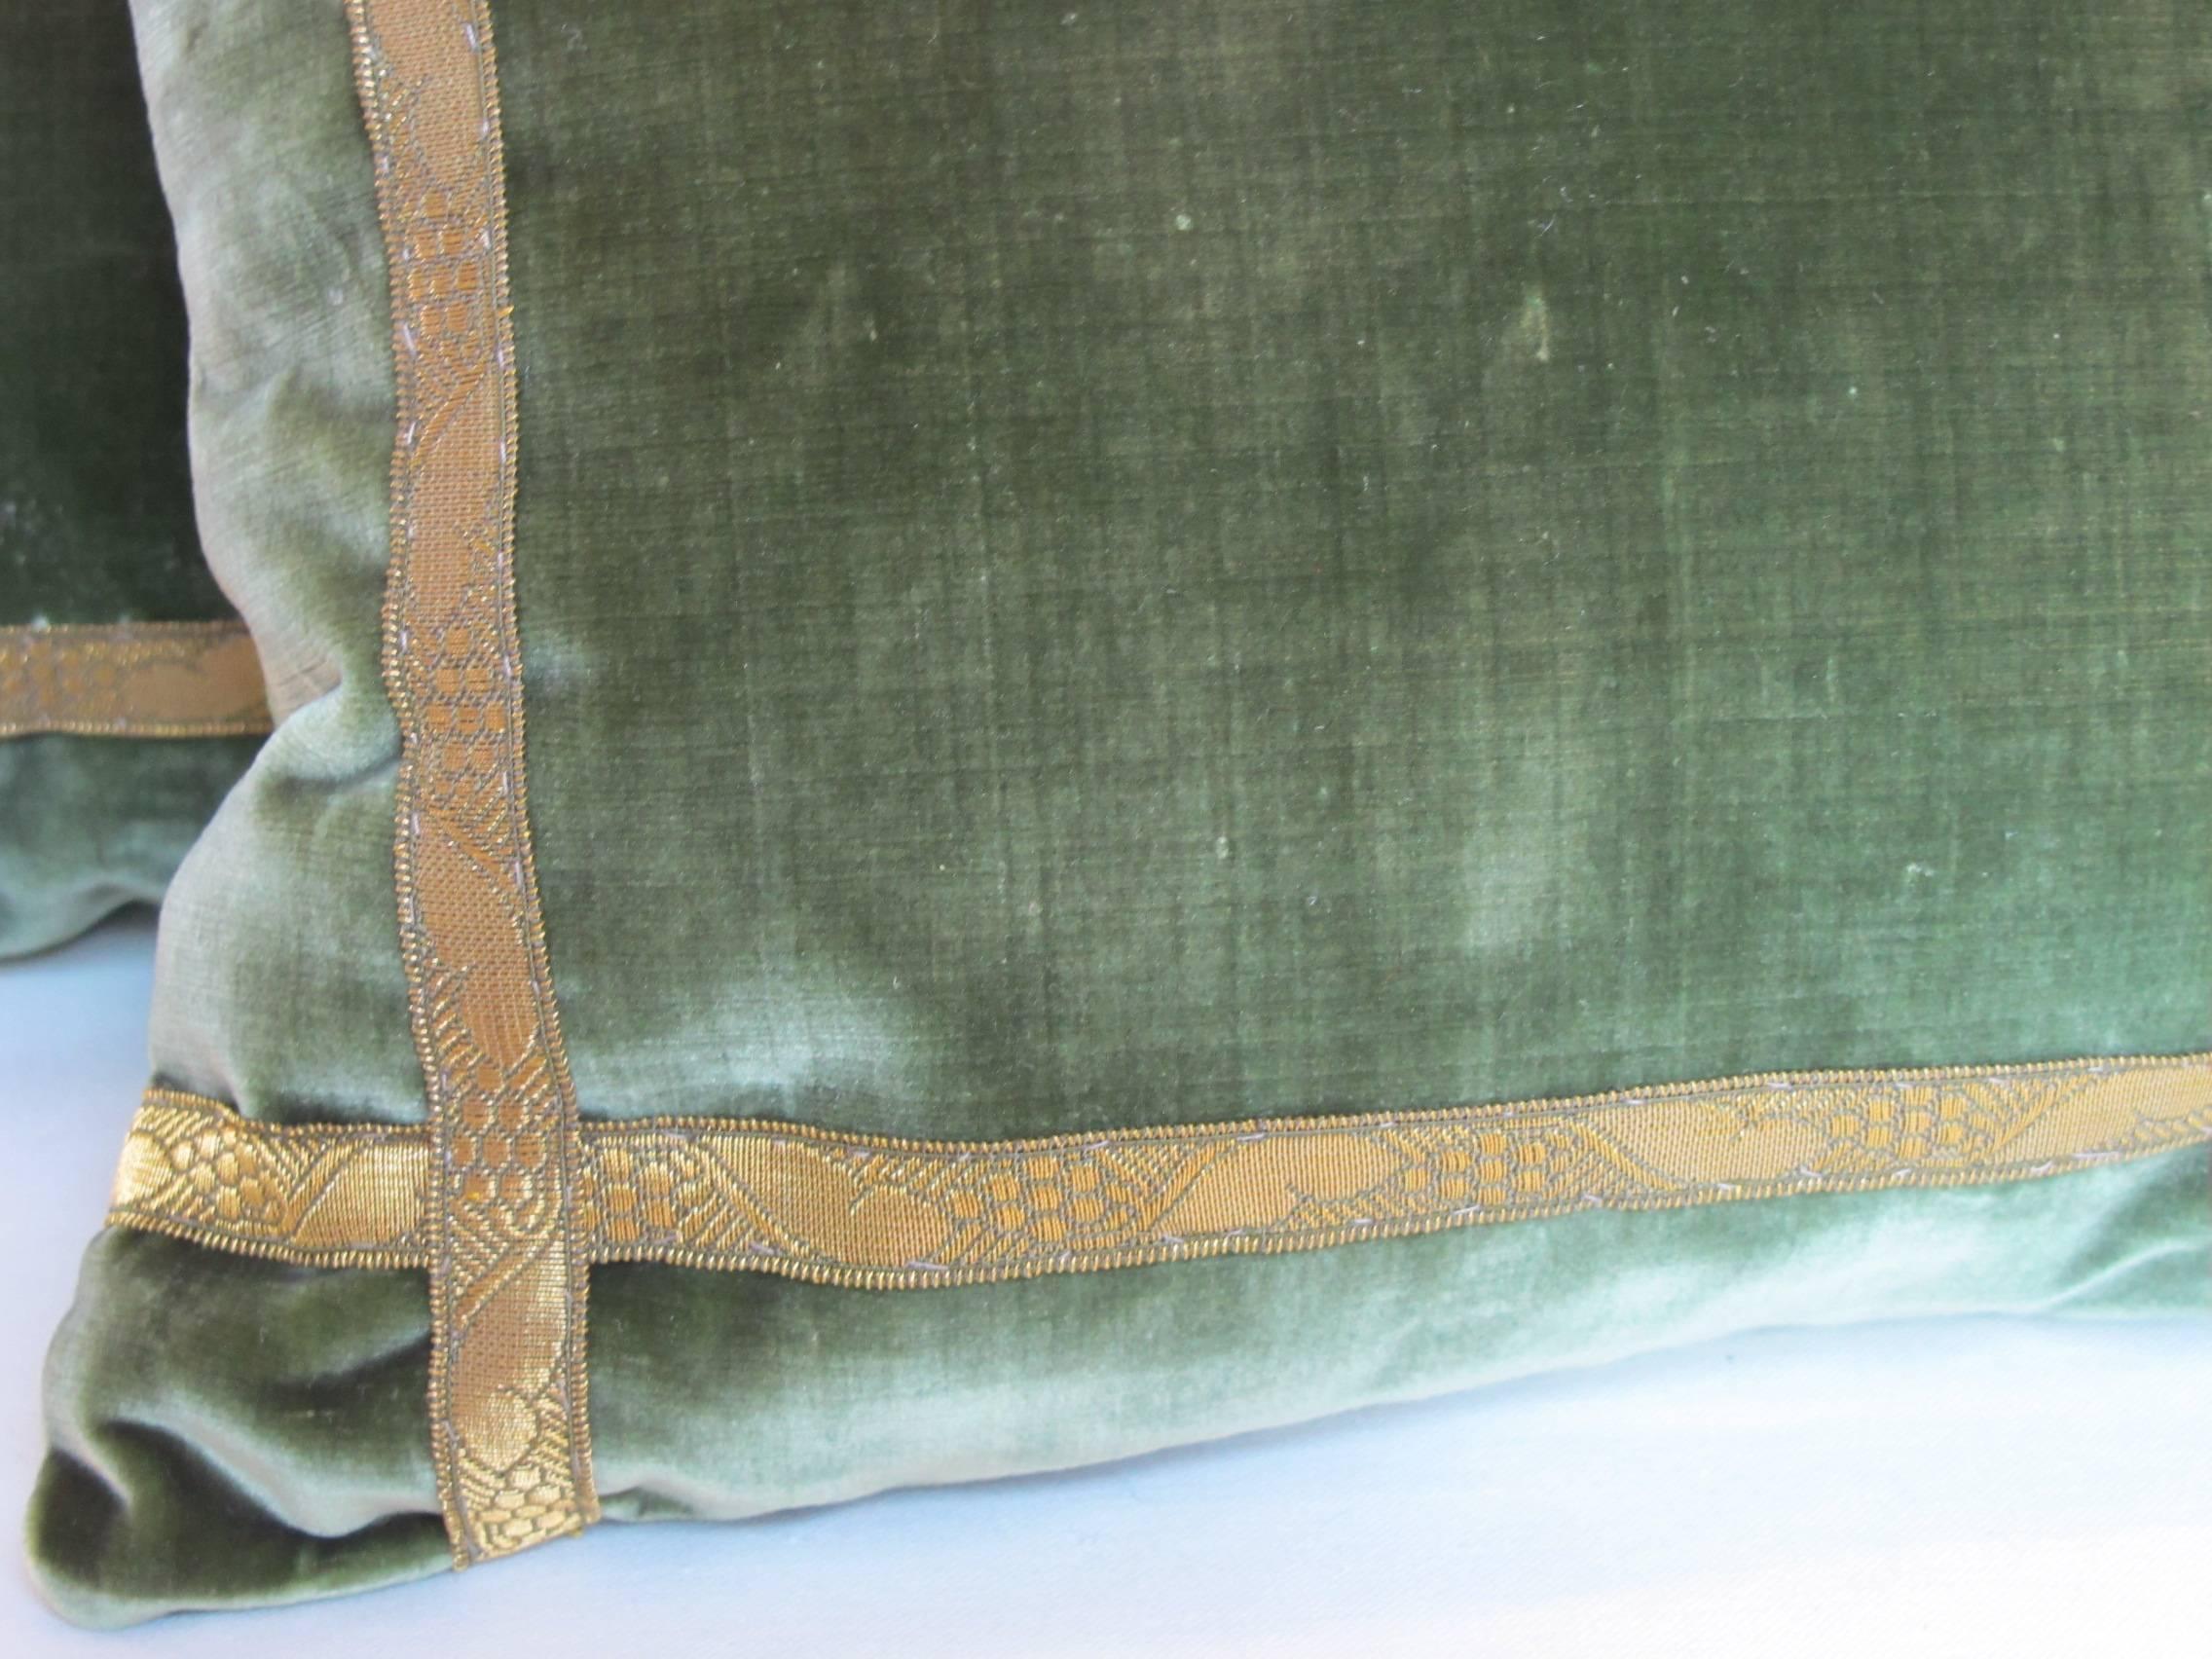 Newly made pillows from an early 20th century silk velvet embellished with antique metalic trim, backed in coordinating green silk